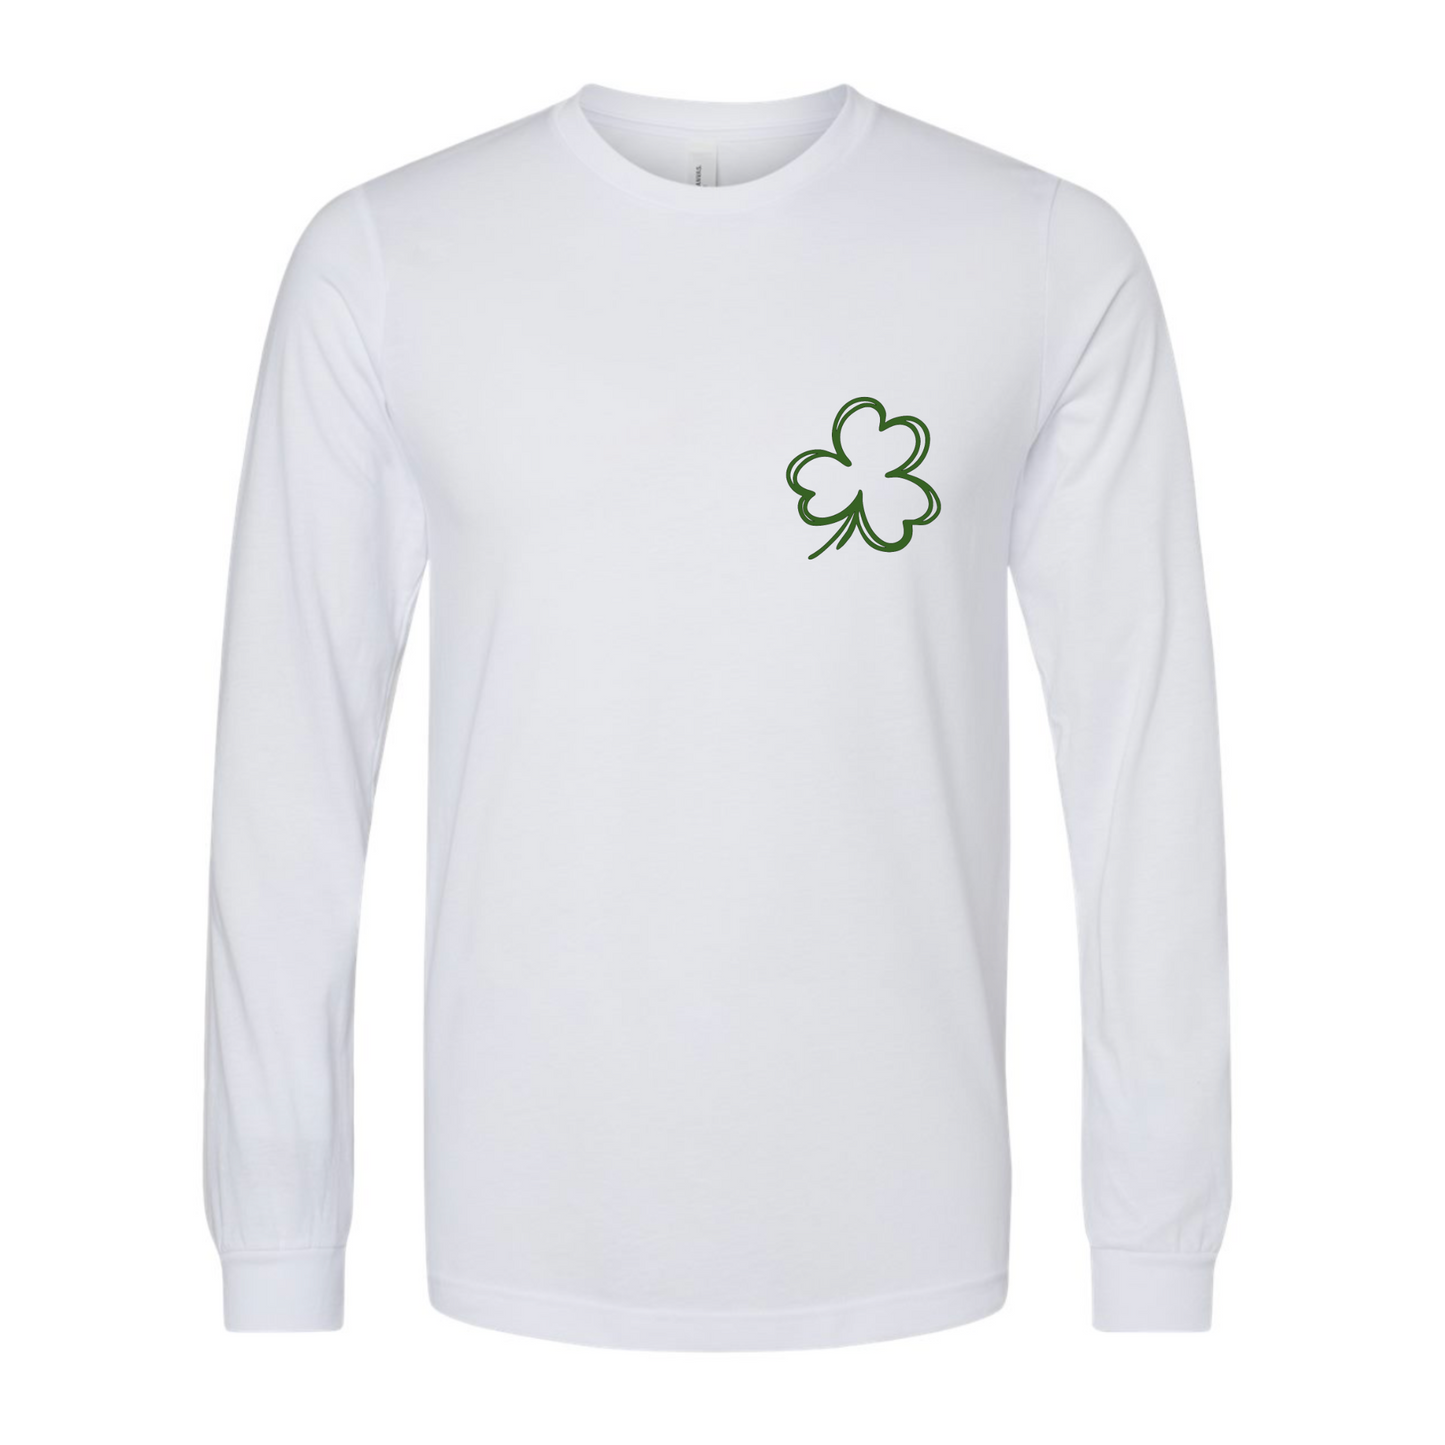 Feeling Lucky Long Sleeve Shirt in white. The back has a repetitive curvy saying "feeling lucky" with a smiley face making a peace sign with the eyes as clovers in green. The front has a four leaf clover pocket sale on the front in green. This is the front view of the shirt.